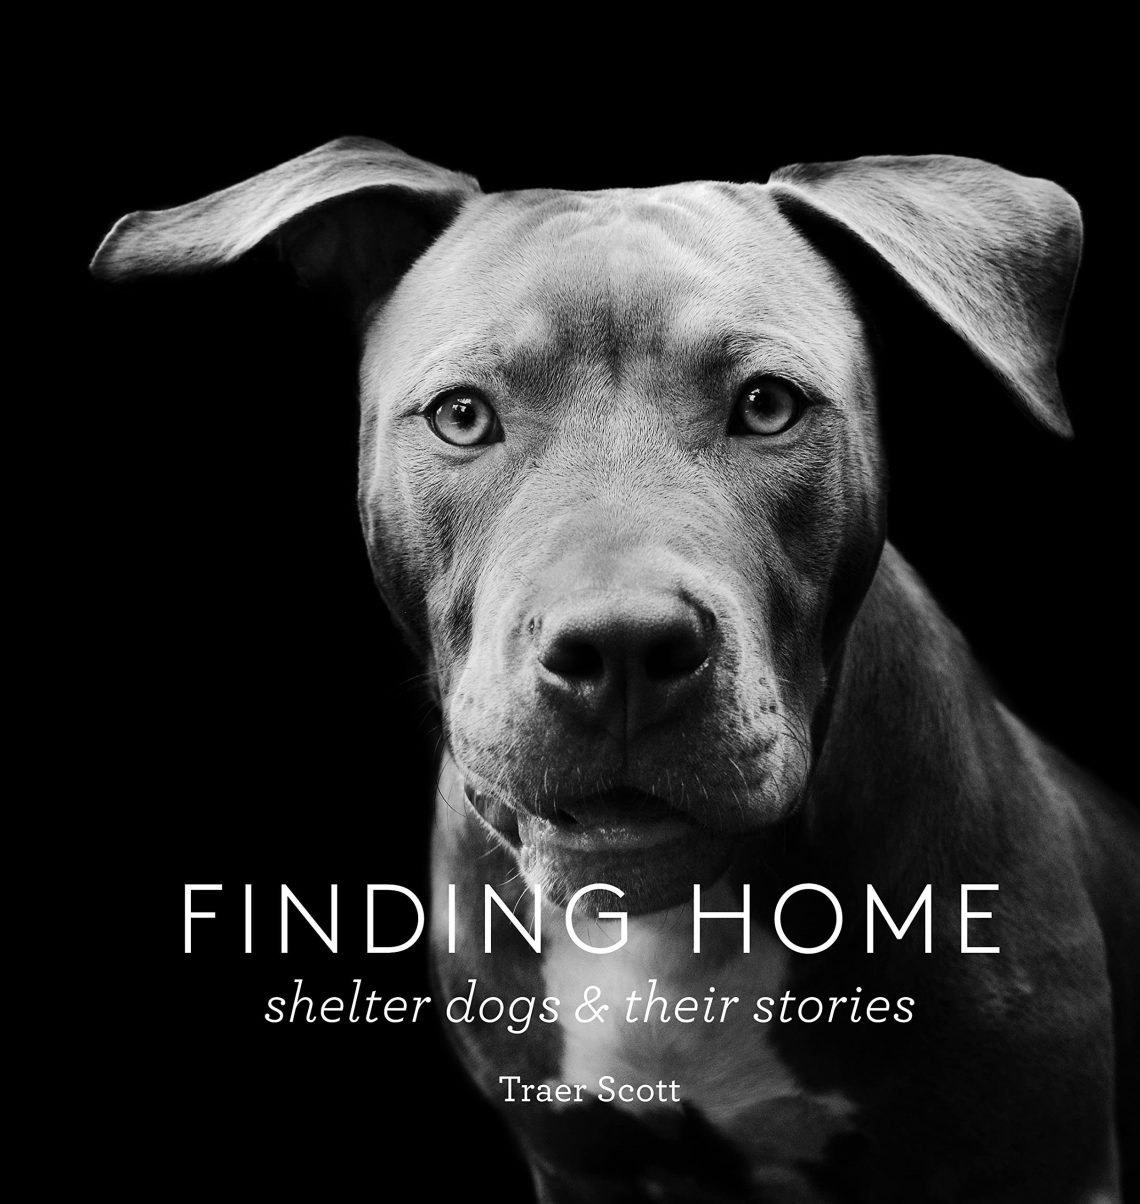 Happy stories about how dogs found a home